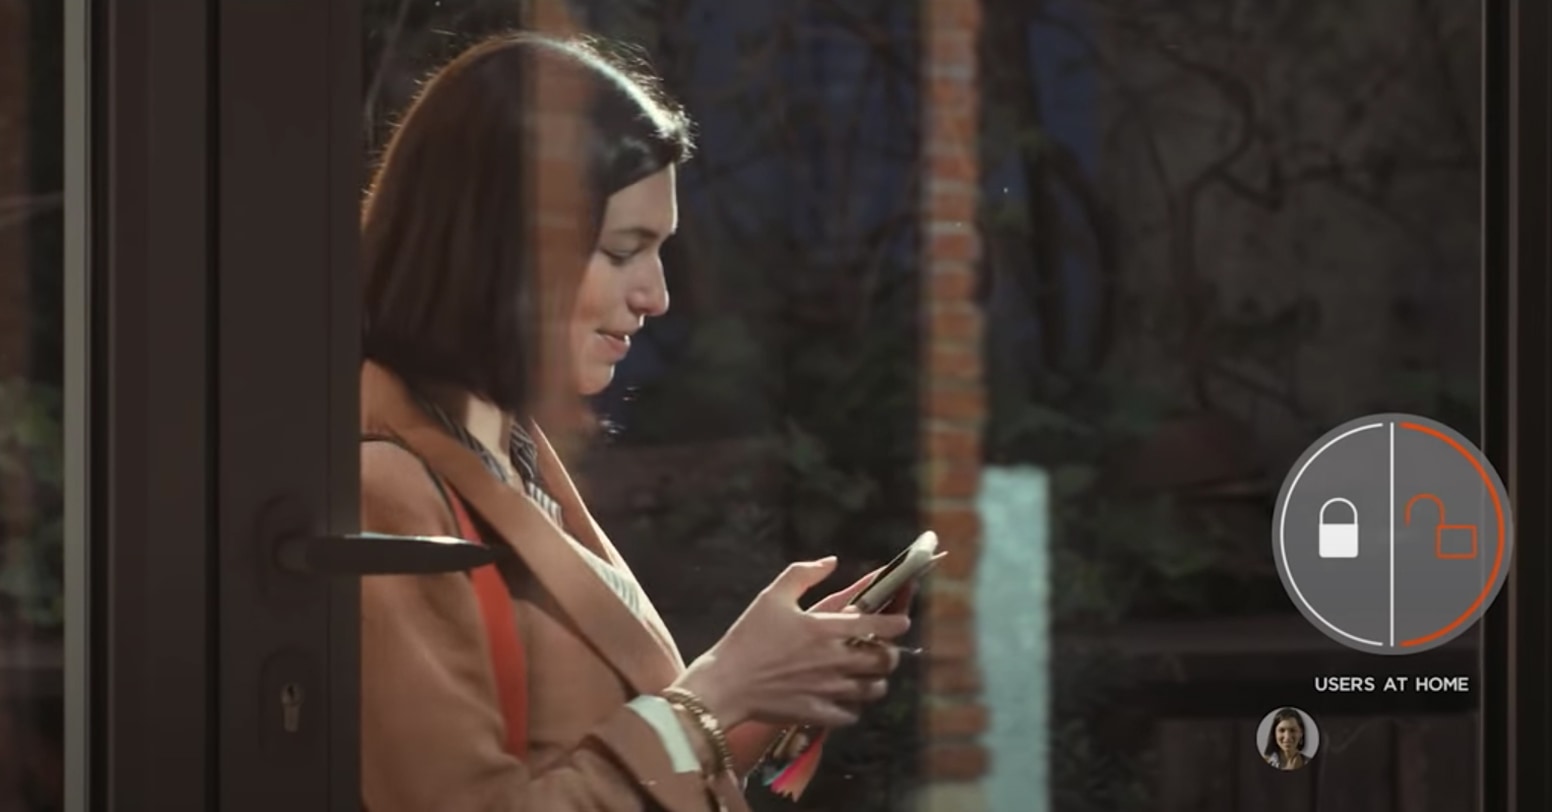 still from a youtube video showing a woman looking at her smartphone with a graphic overlay of a lock